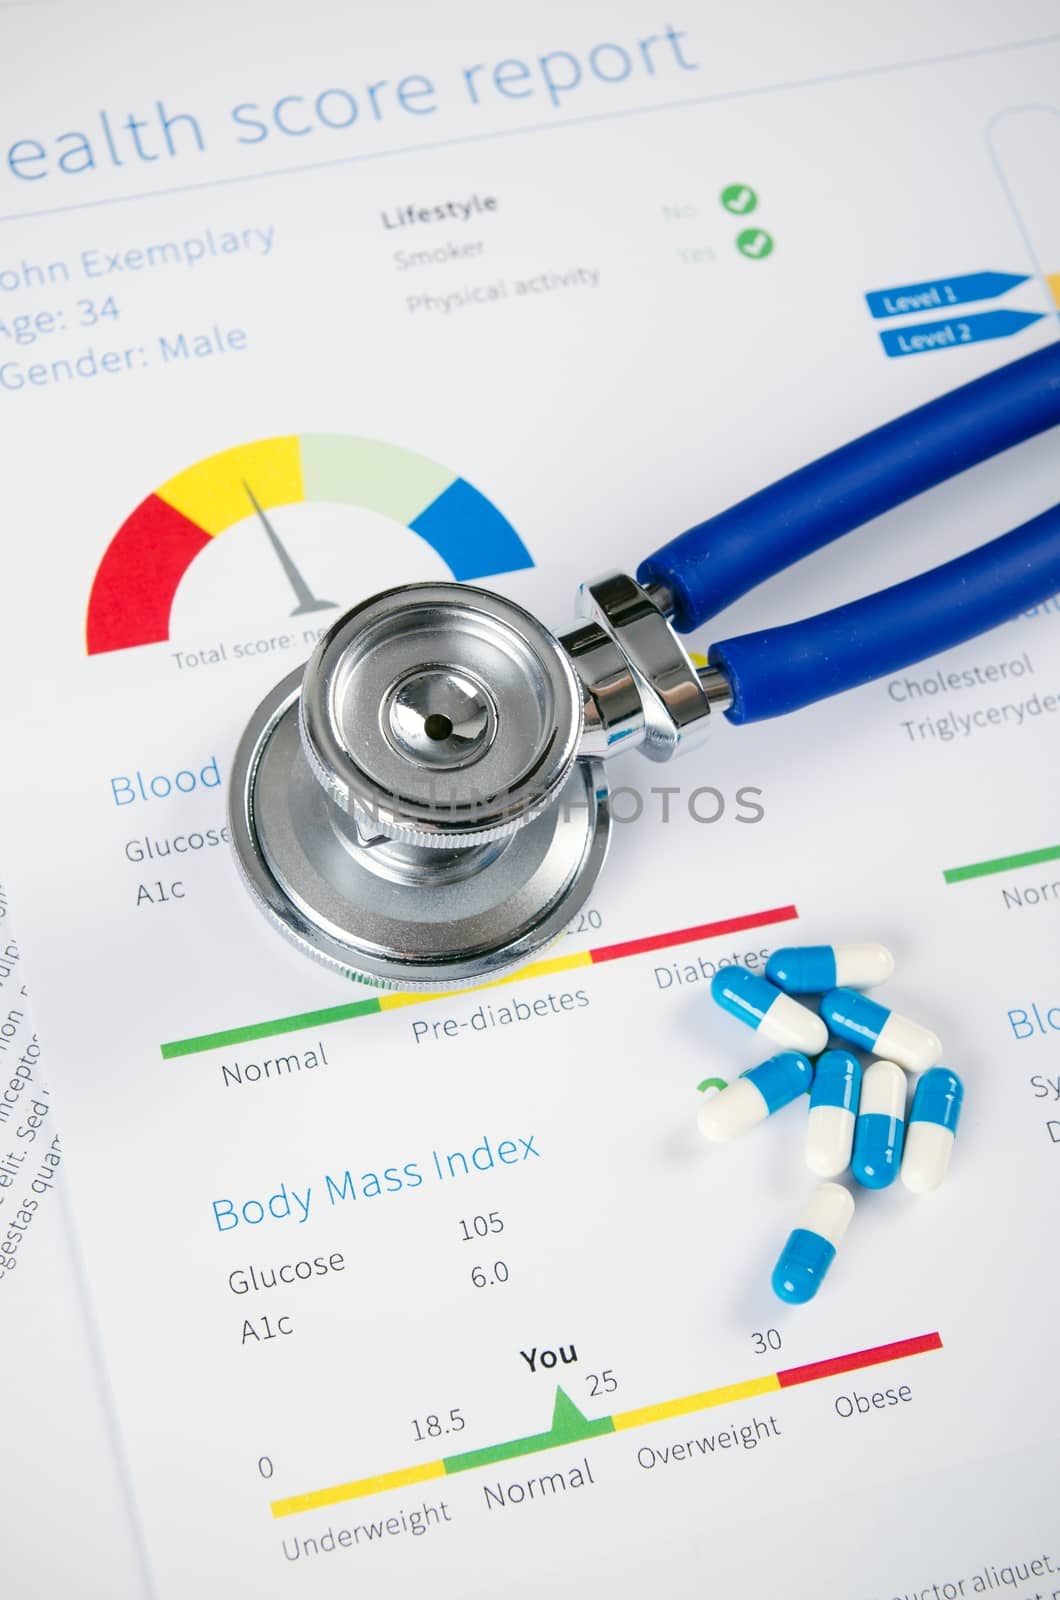 Health condition score report. Stethoscope on medical background by simpson33